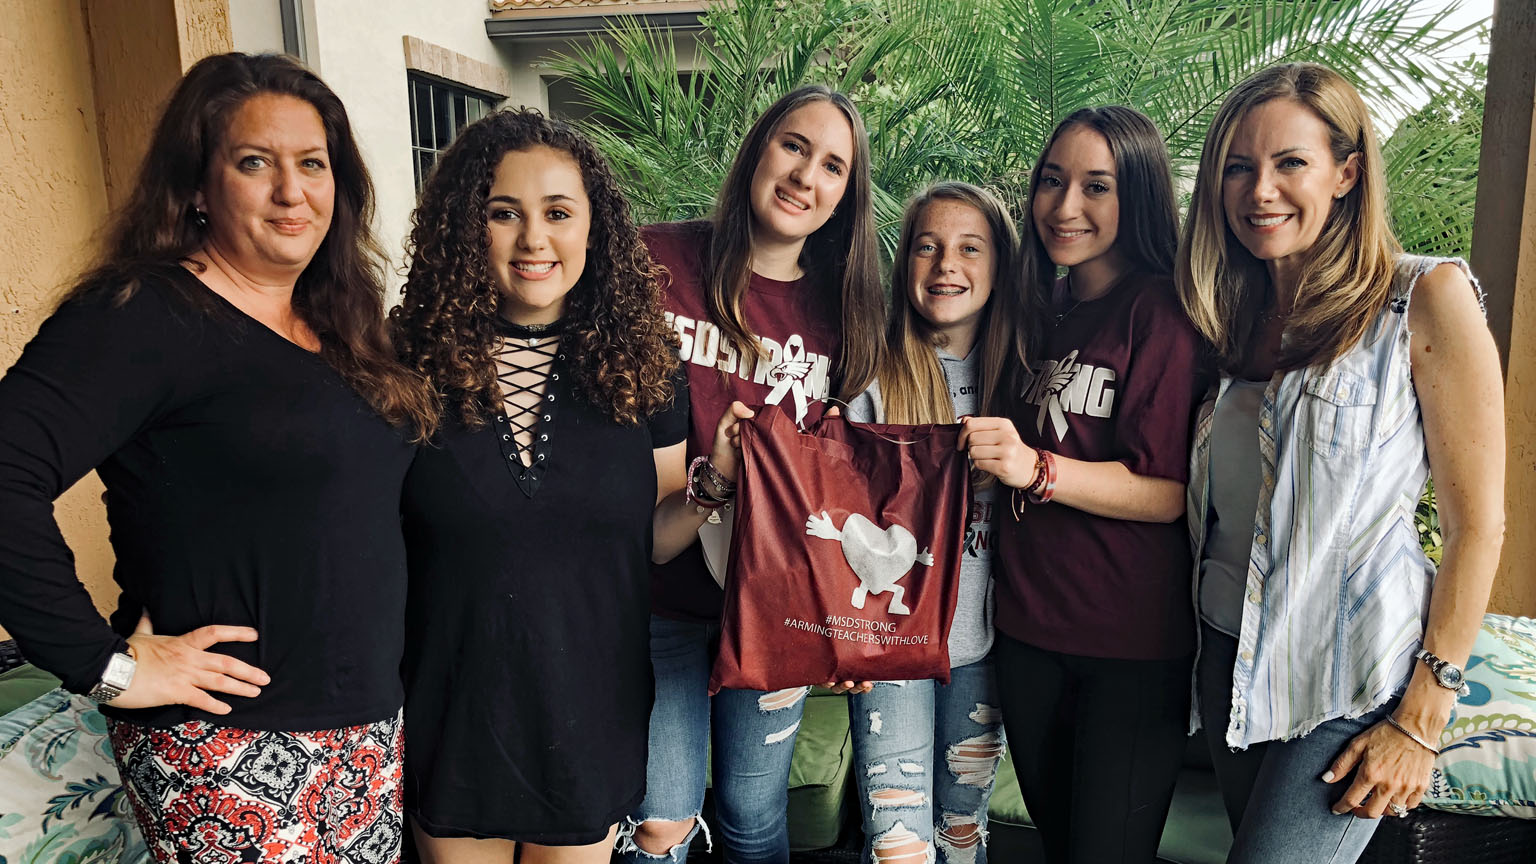 Families Donate Tote Bags Filled with Gifts for Marjory Stoneman Douglas Teachers, Staff 2